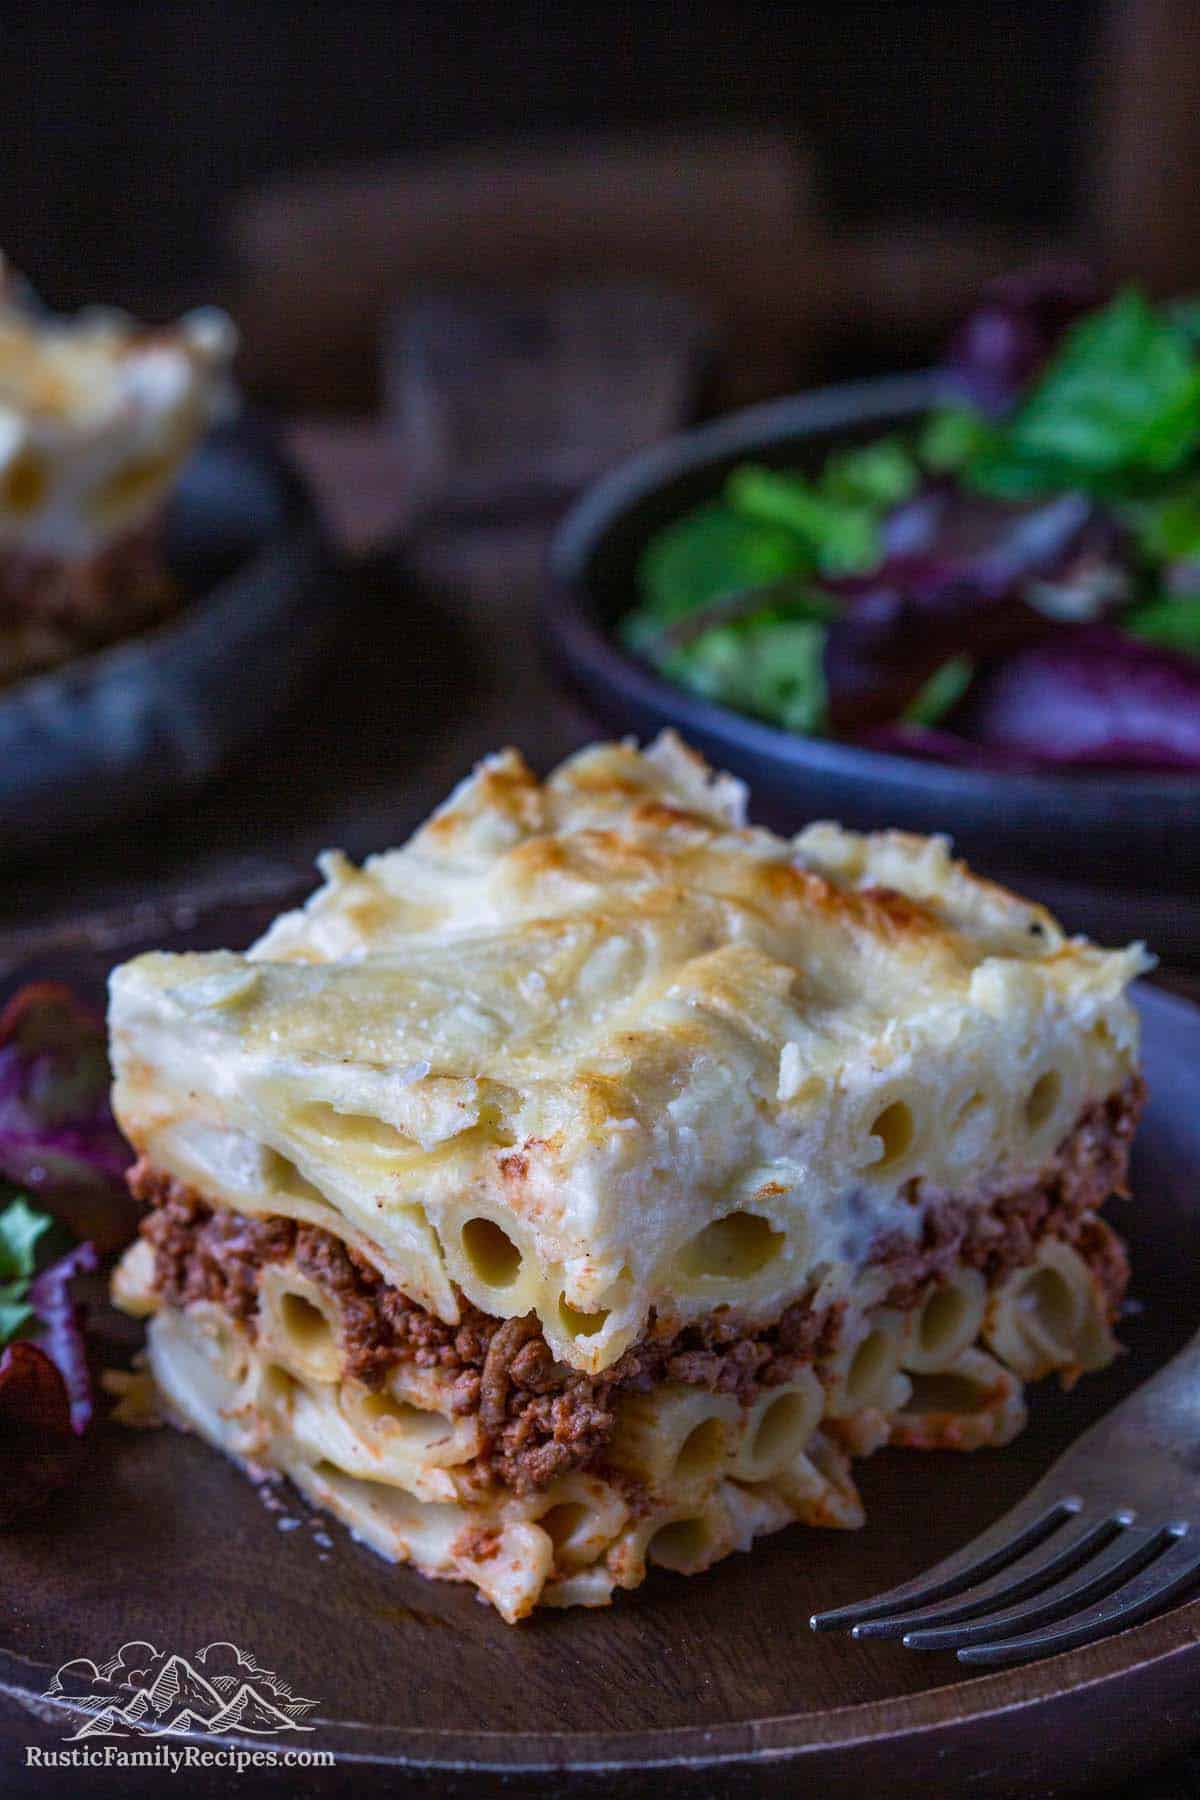 A slice of pastitsio with all its pasta, meat, and béchamel layers.